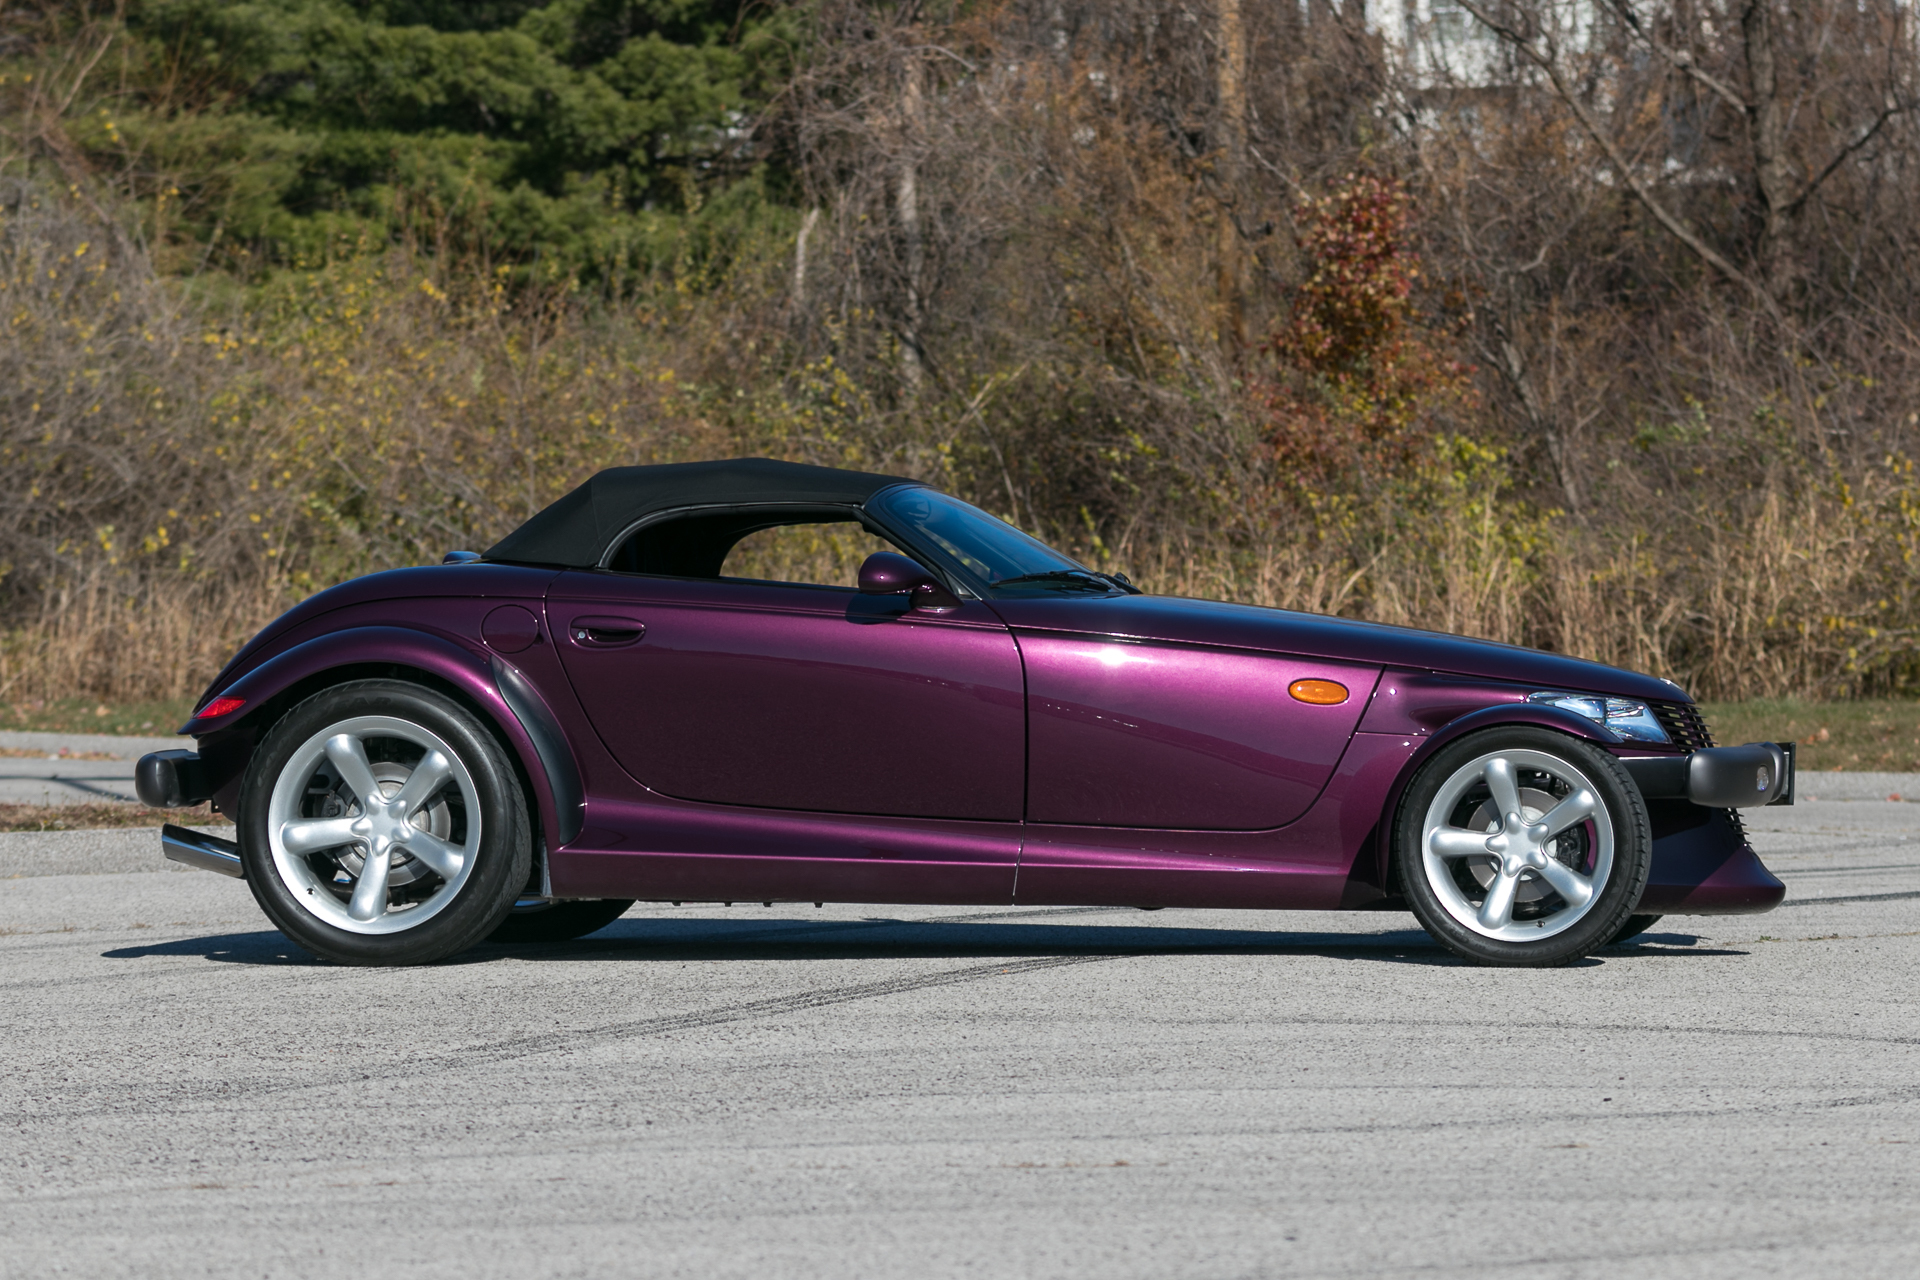 vehicles, plymouth prowler, car, plymouth, purple car